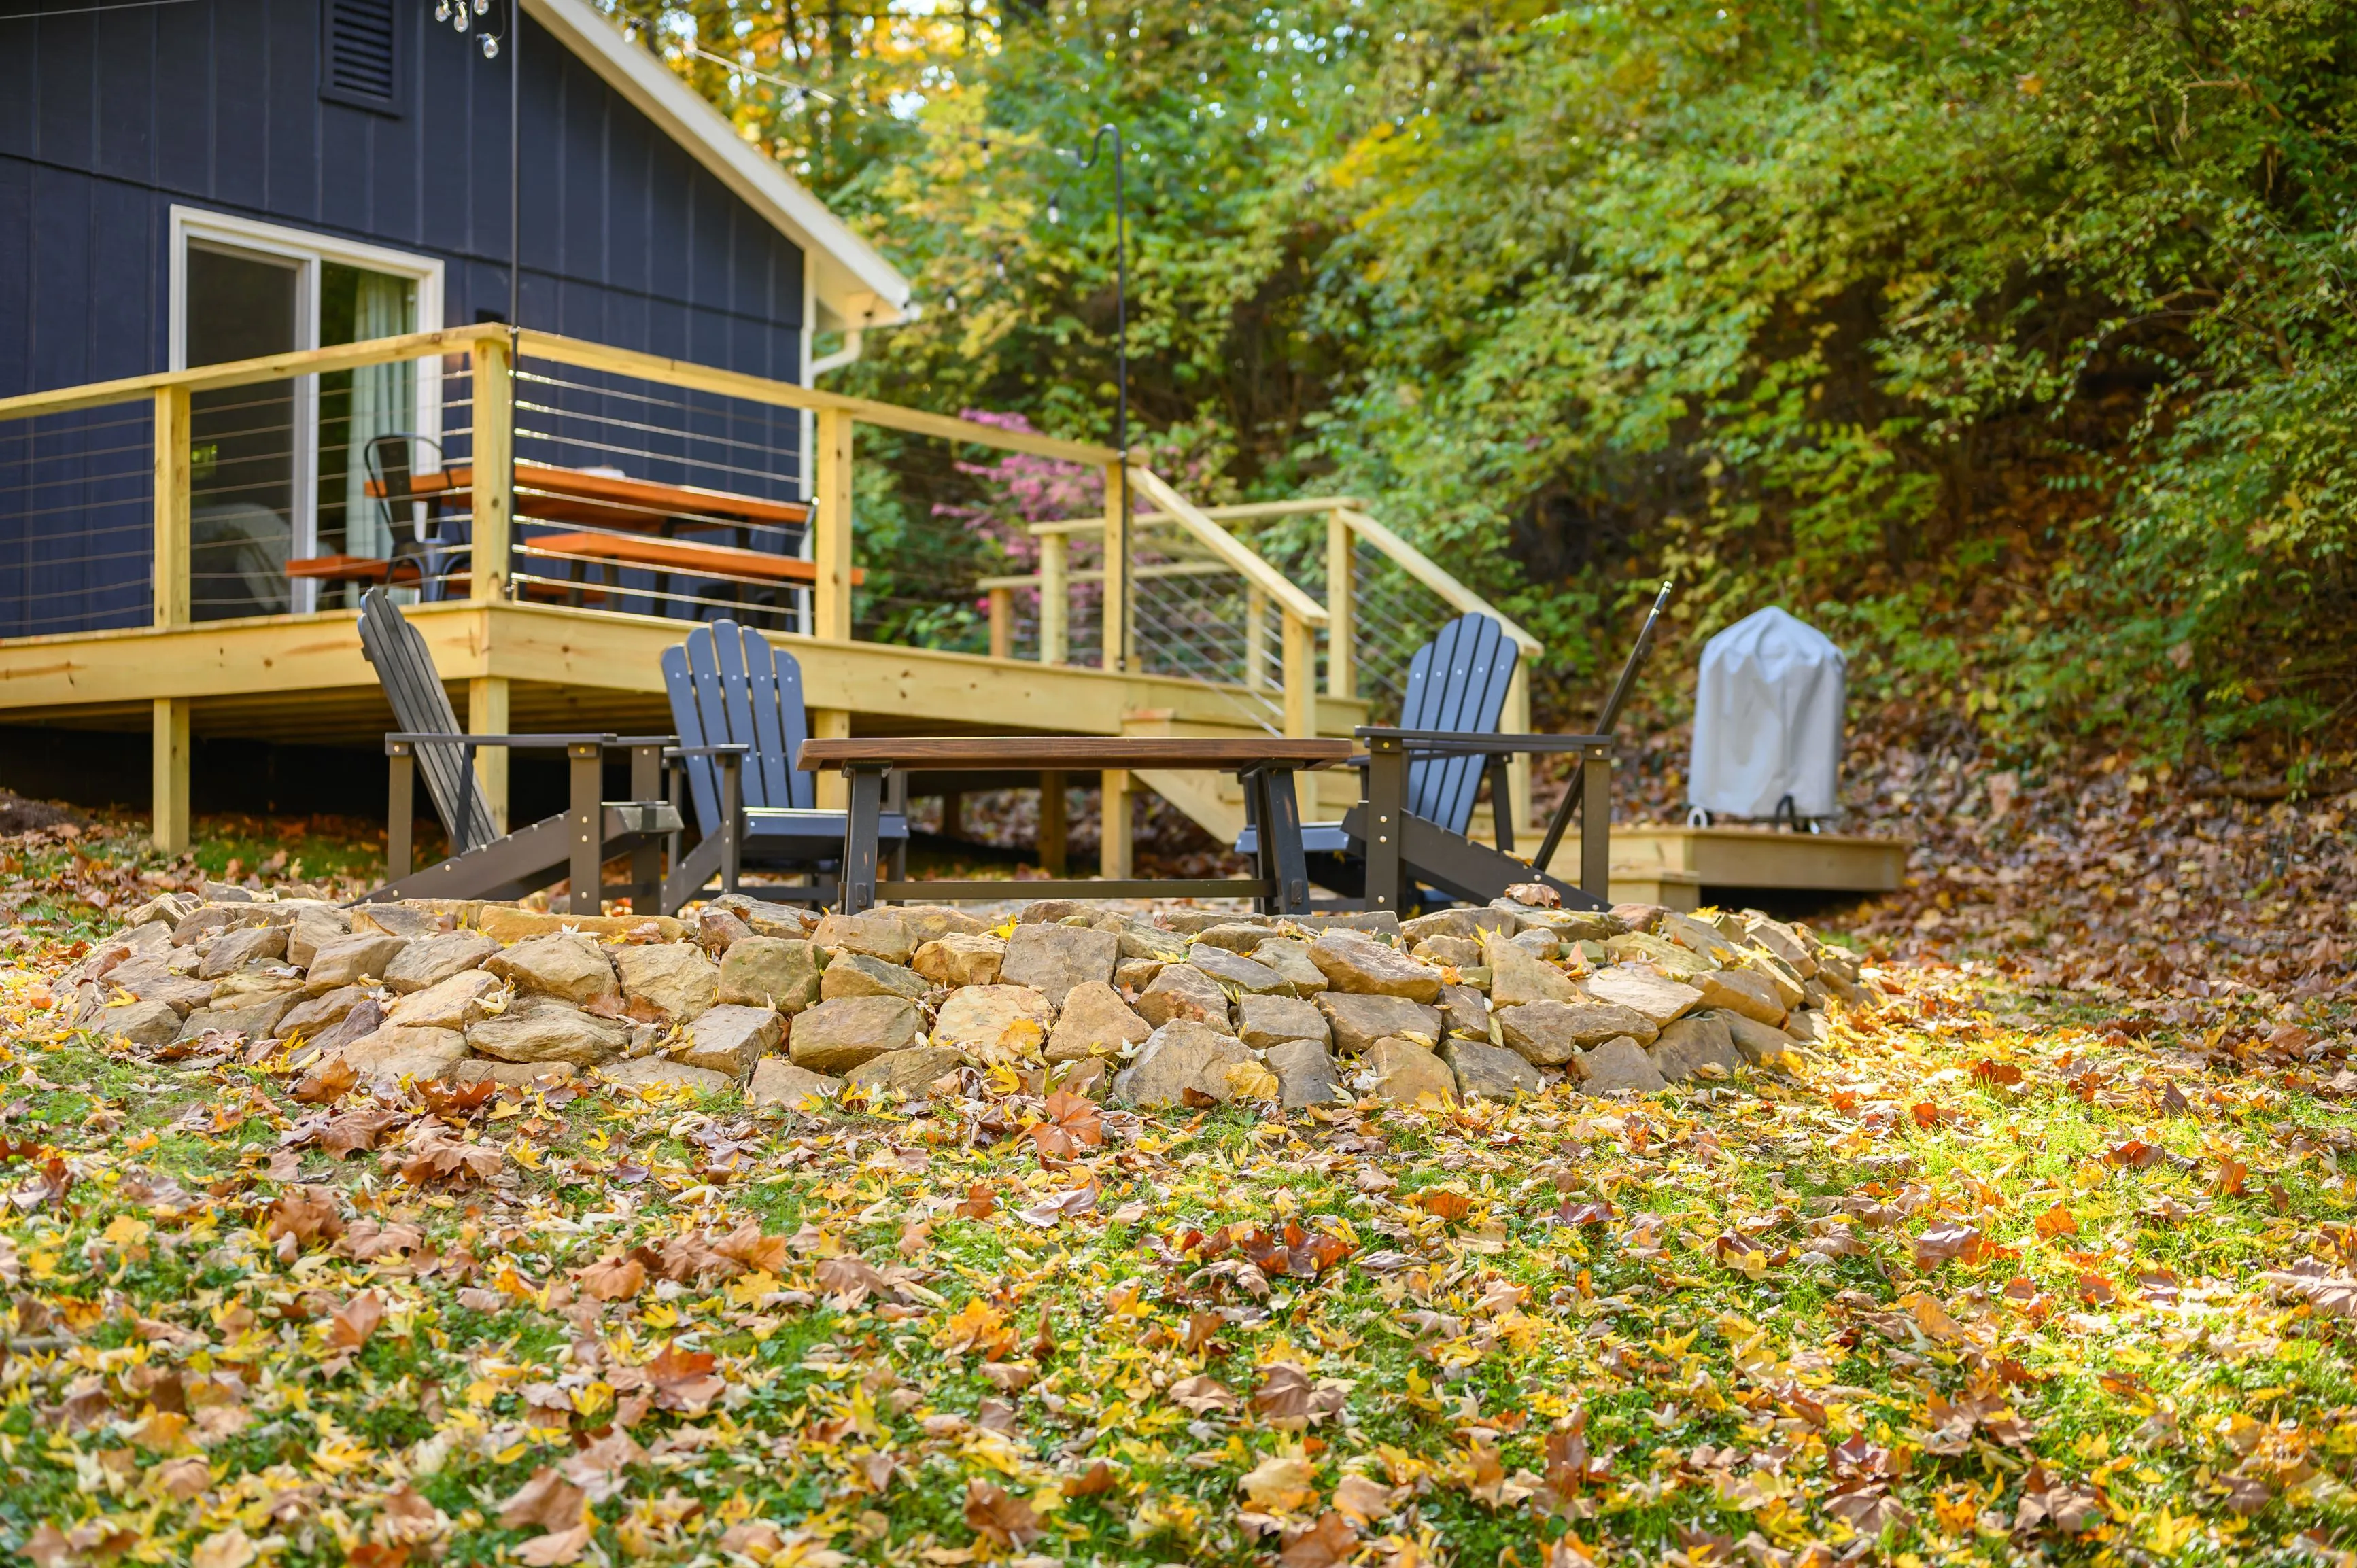 Cozy backyard deck with Adirondack chairs and a stone fire pit surrounded by autumn leaves.